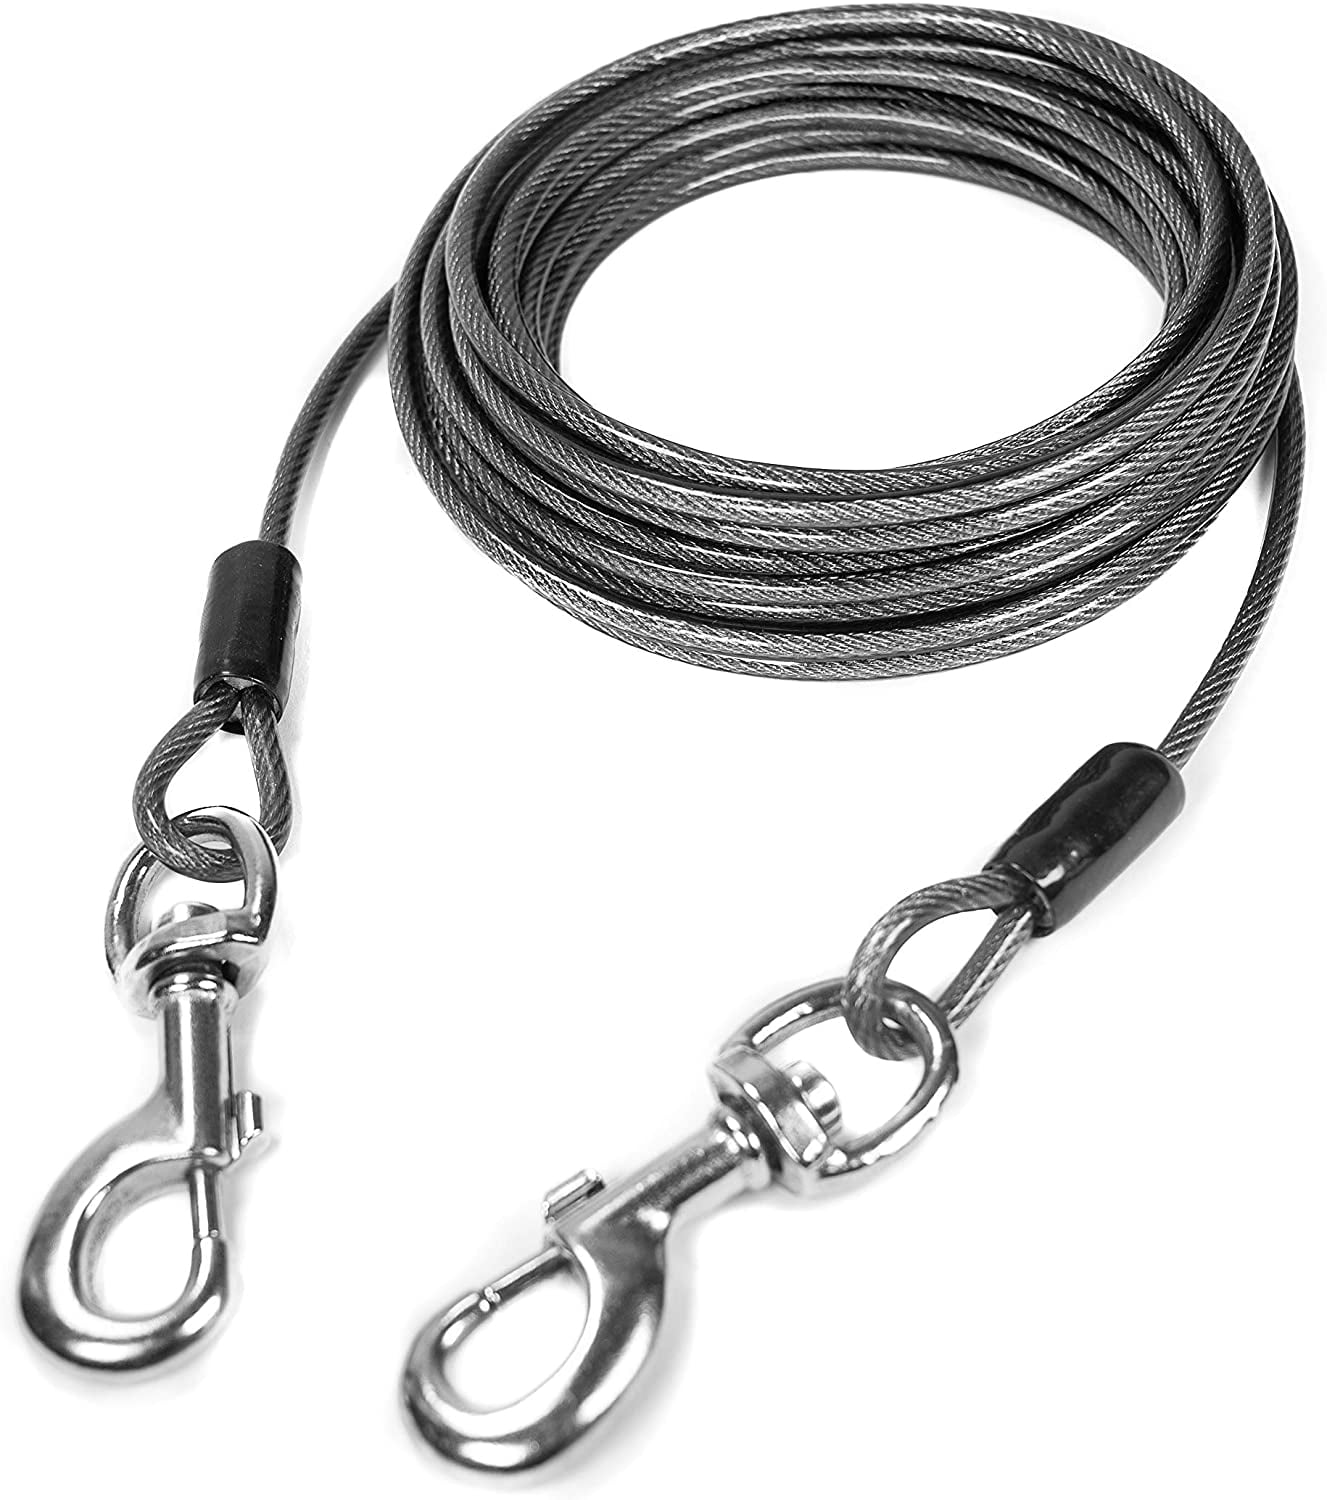 Mighty Paw Tie Out for Dogs 30 feet Braided Steel Black Tie out Chew ...